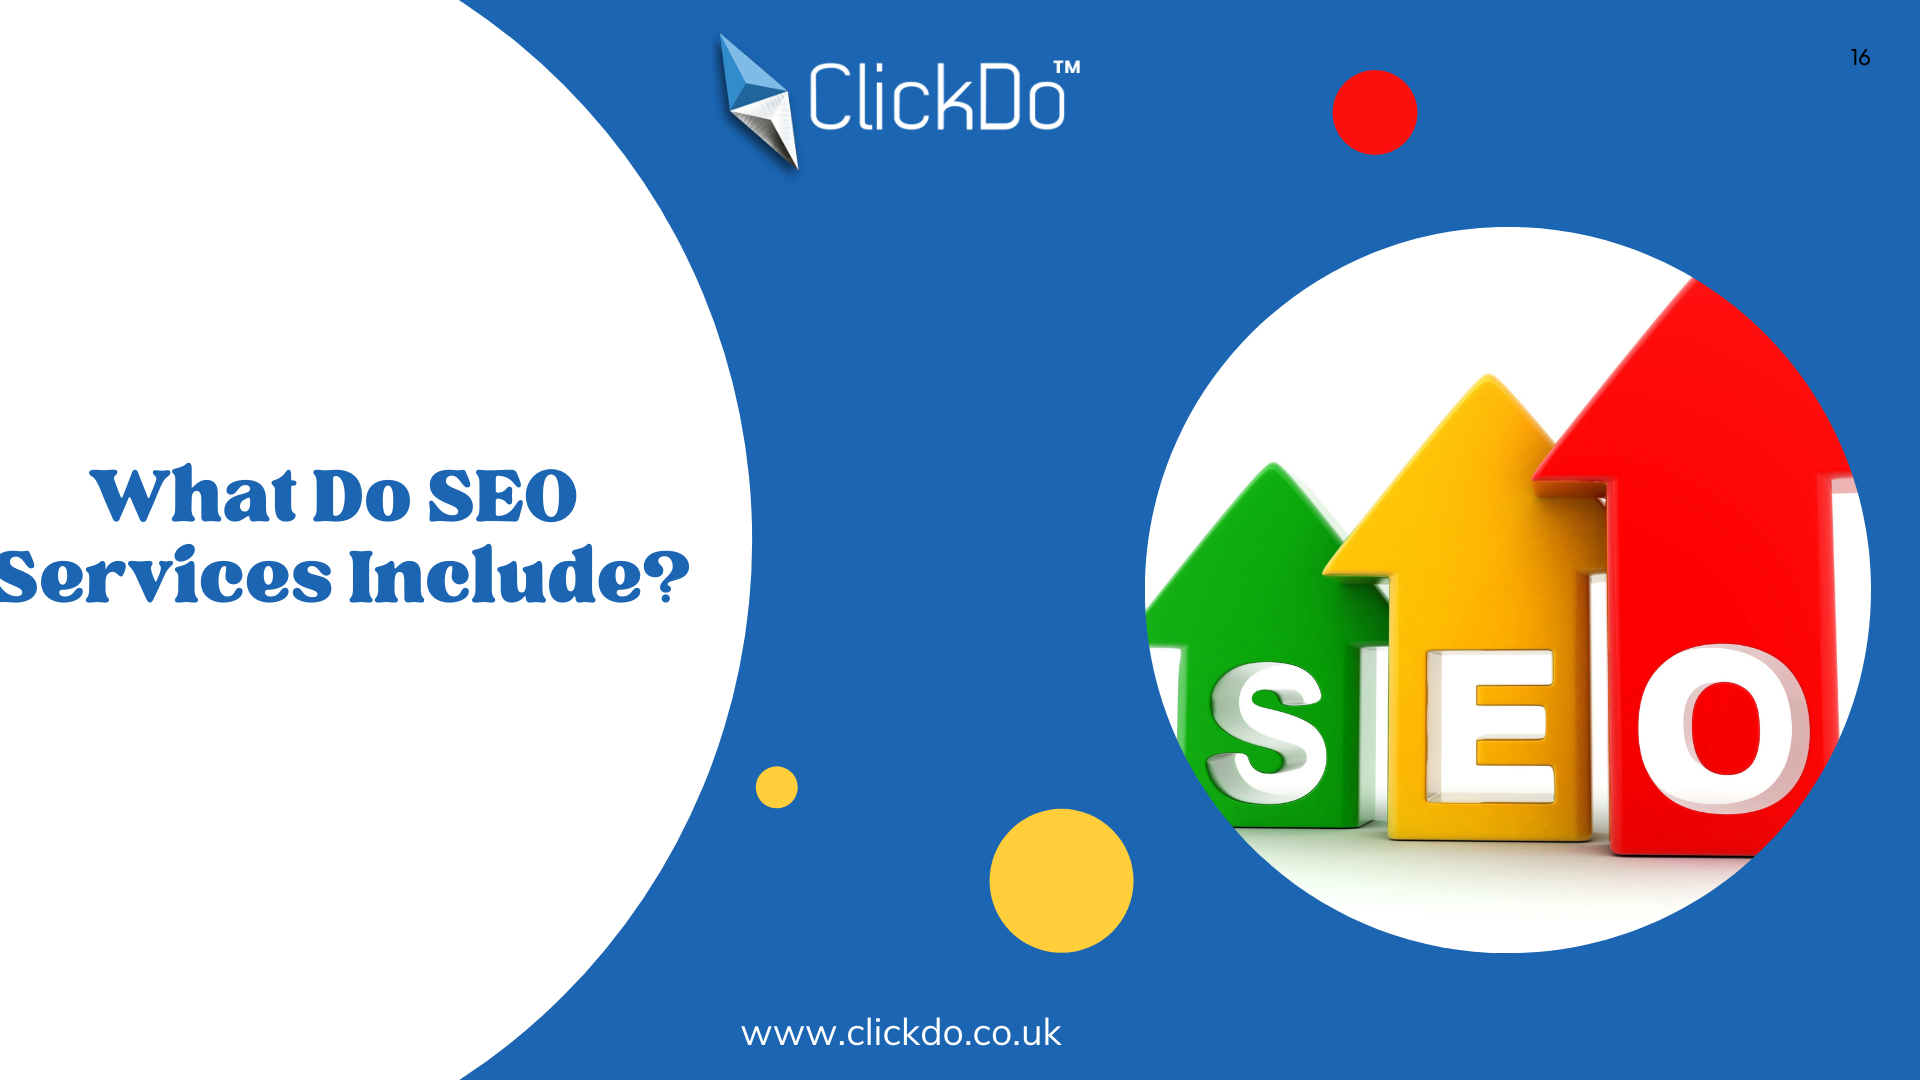 What Do SEO Services Include